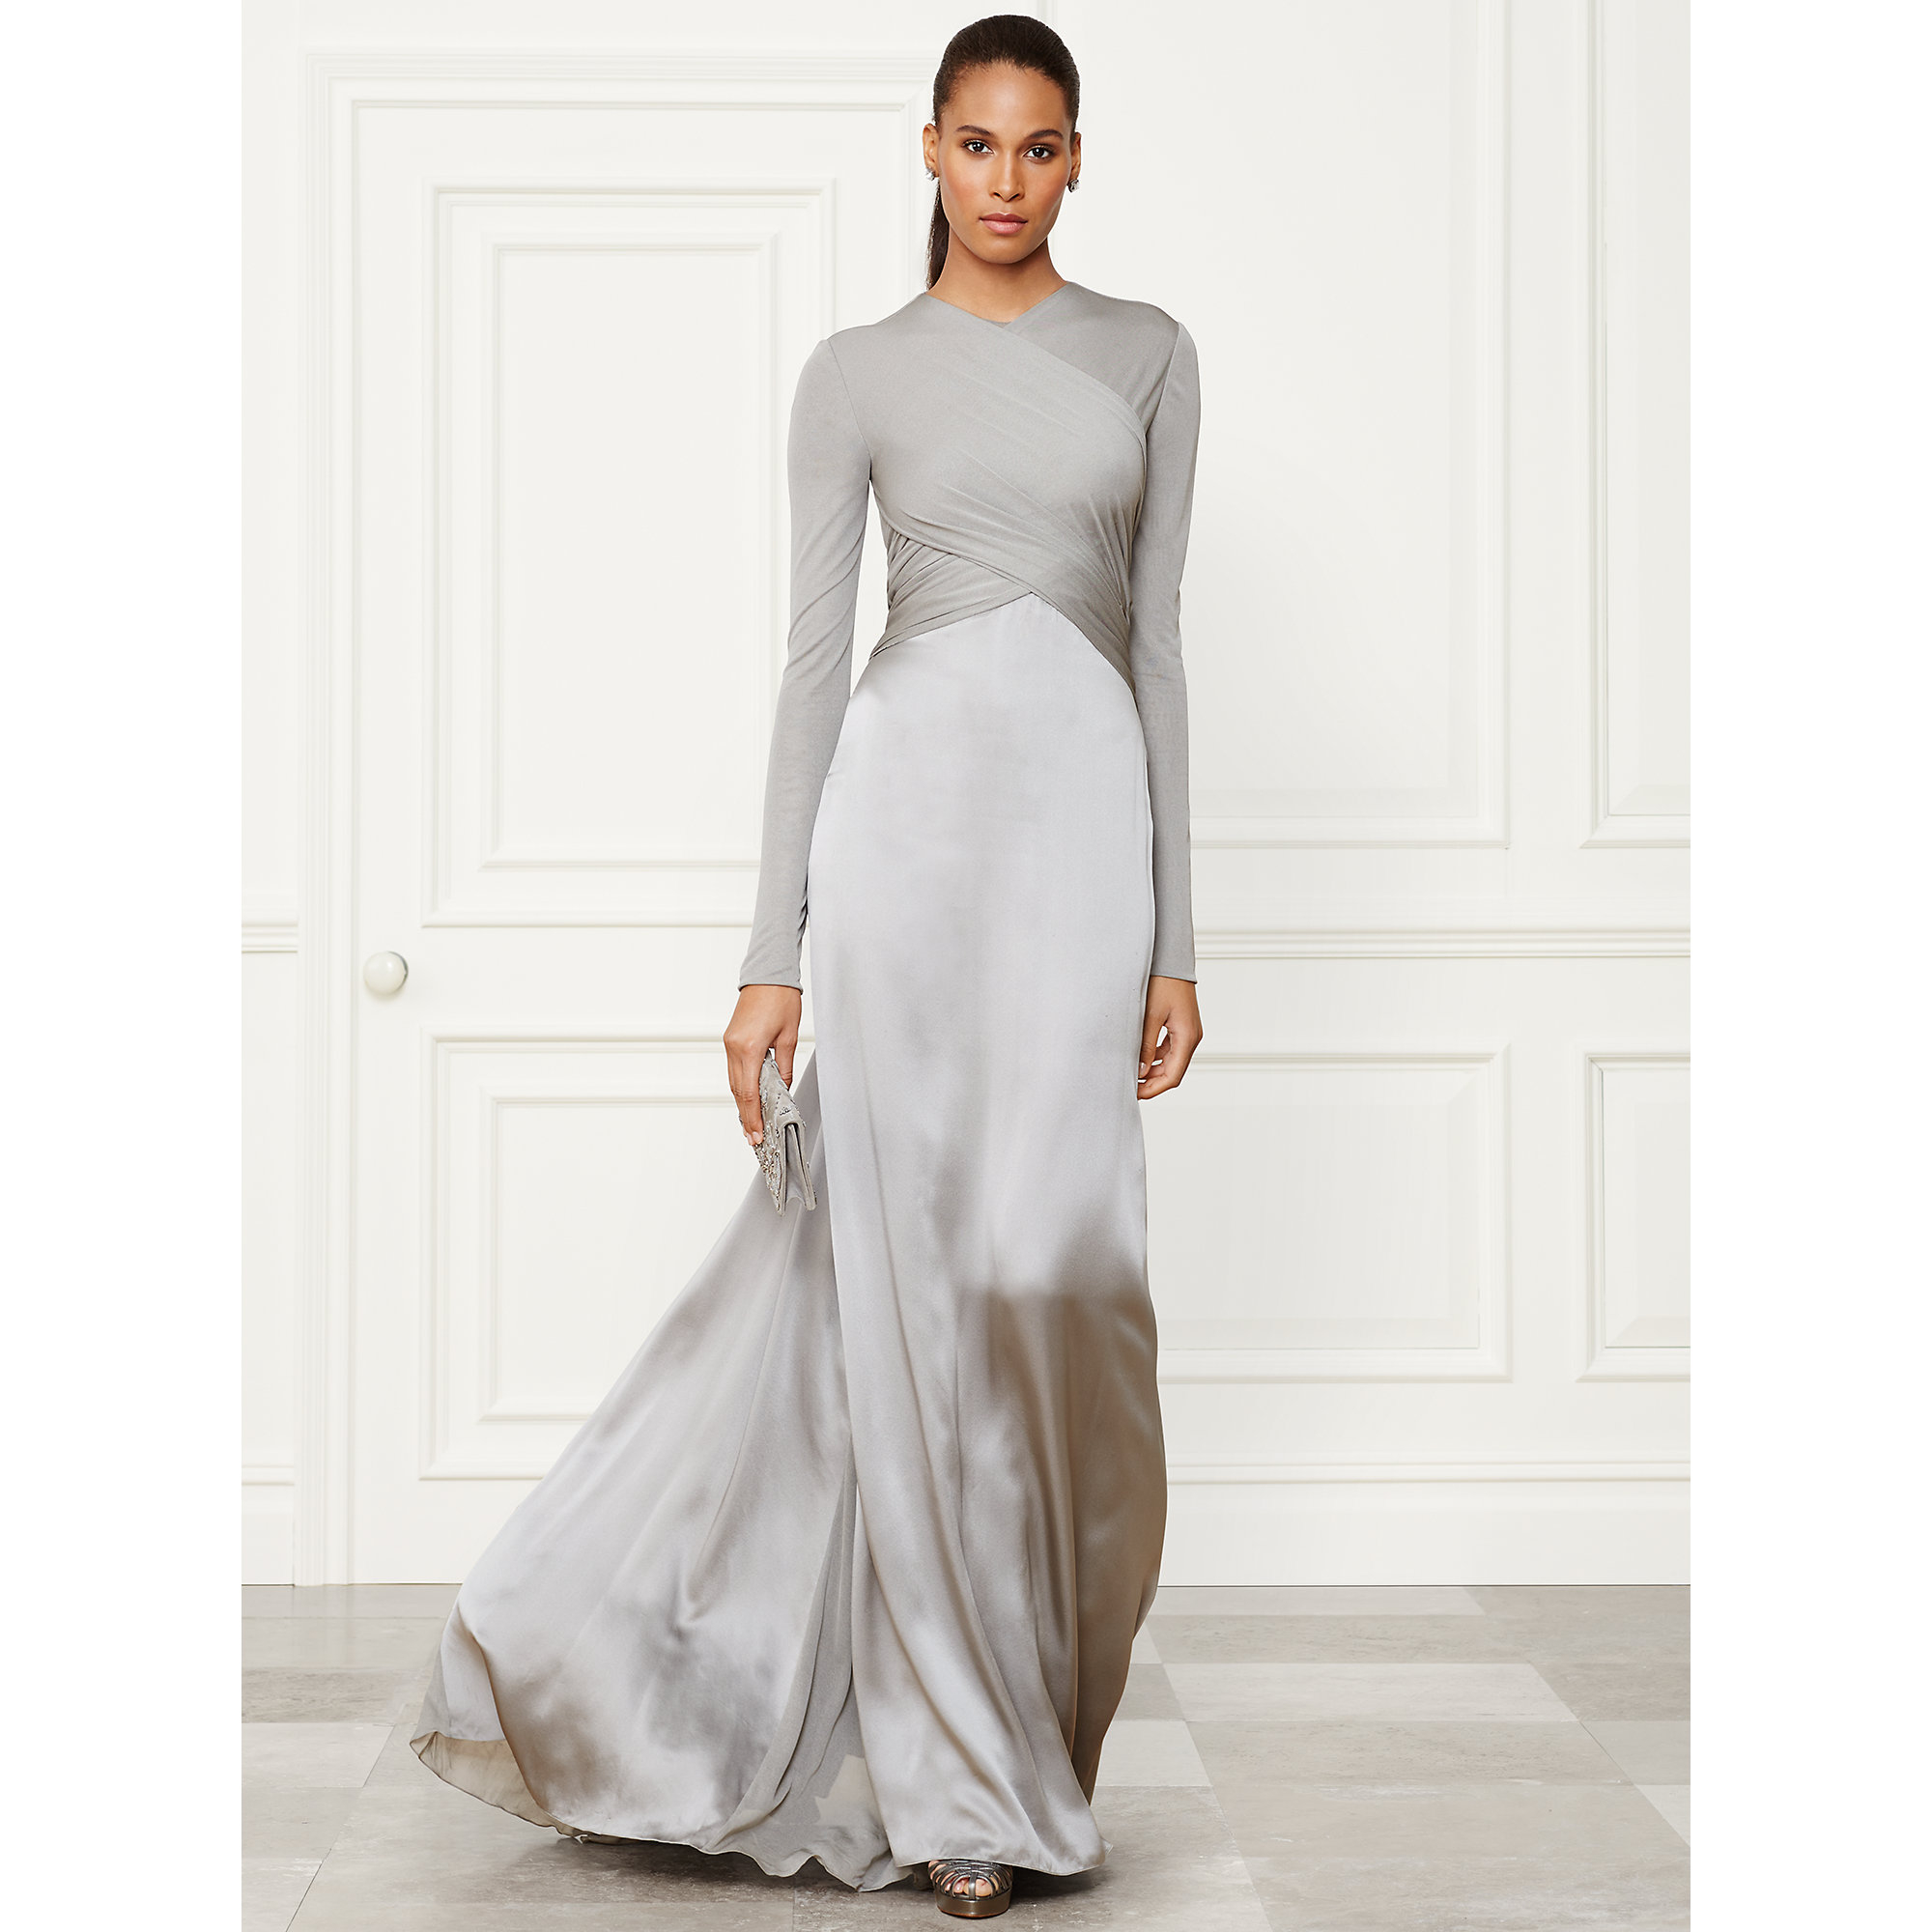 Ralph Lauren Collection Fiona Evening Gown in Grey (Gray) - Lyst